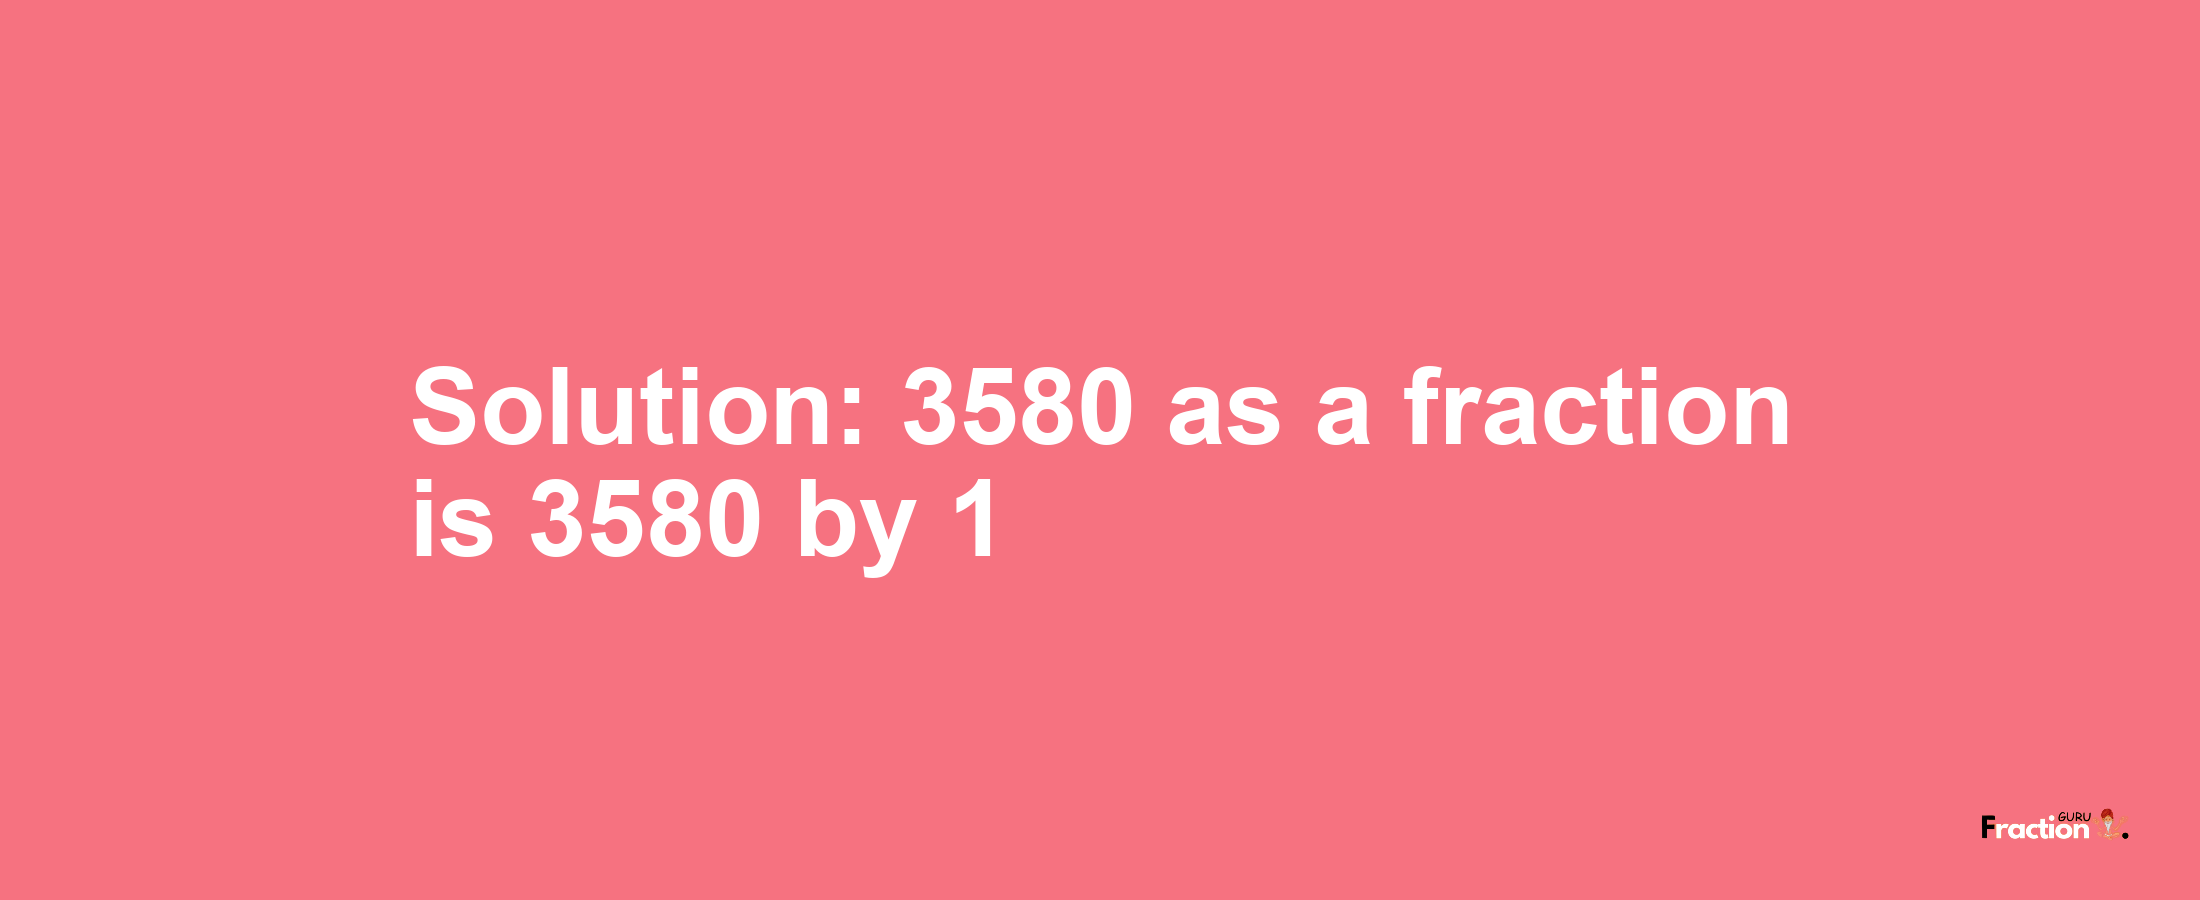 Solution:3580 as a fraction is 3580/1